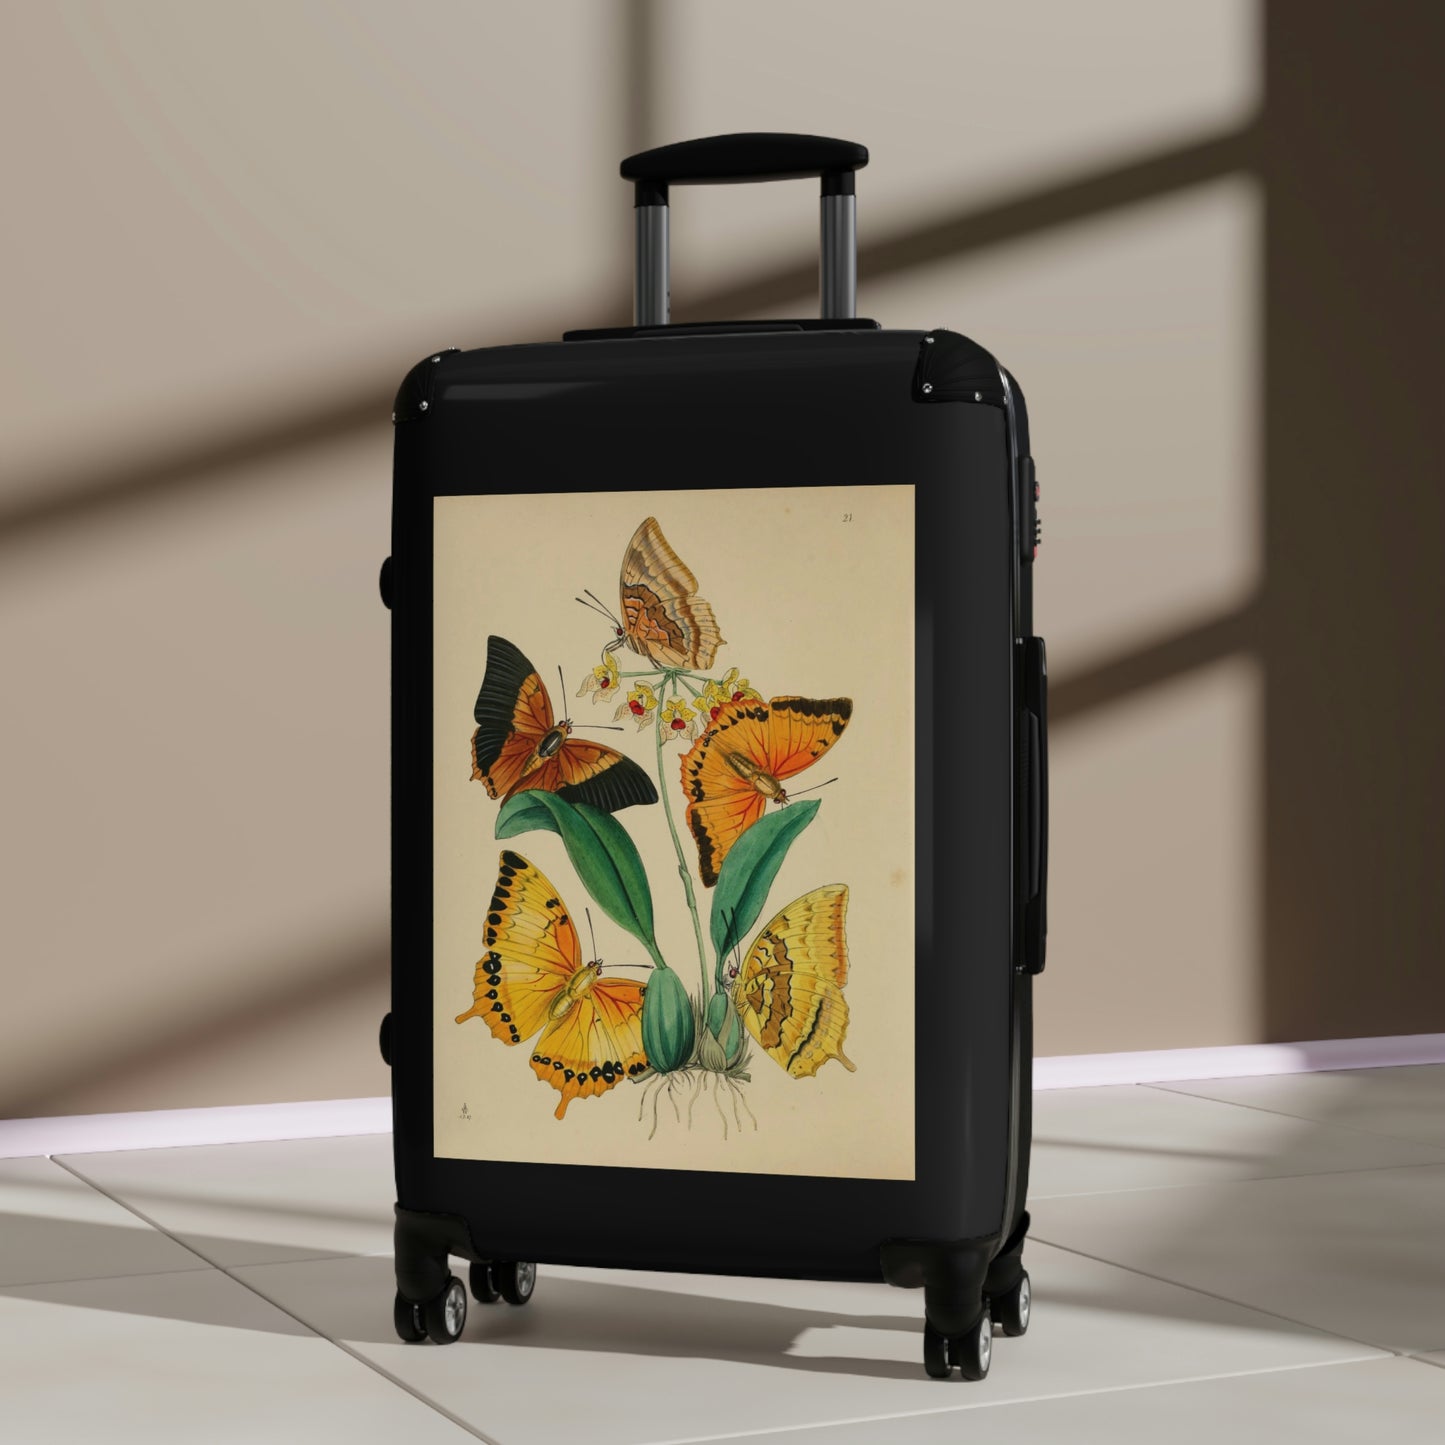 Getrott Butterflies Macrolepidopteran Rhopalocera Yellow Lepidoptera Cabin Suitcase Rolling Luggage Inner Pockets Extended Storage Adjustable Telescopic Handle Inner Pockets Double wheeled Polycarbonate Hard-shell Built-in Lock